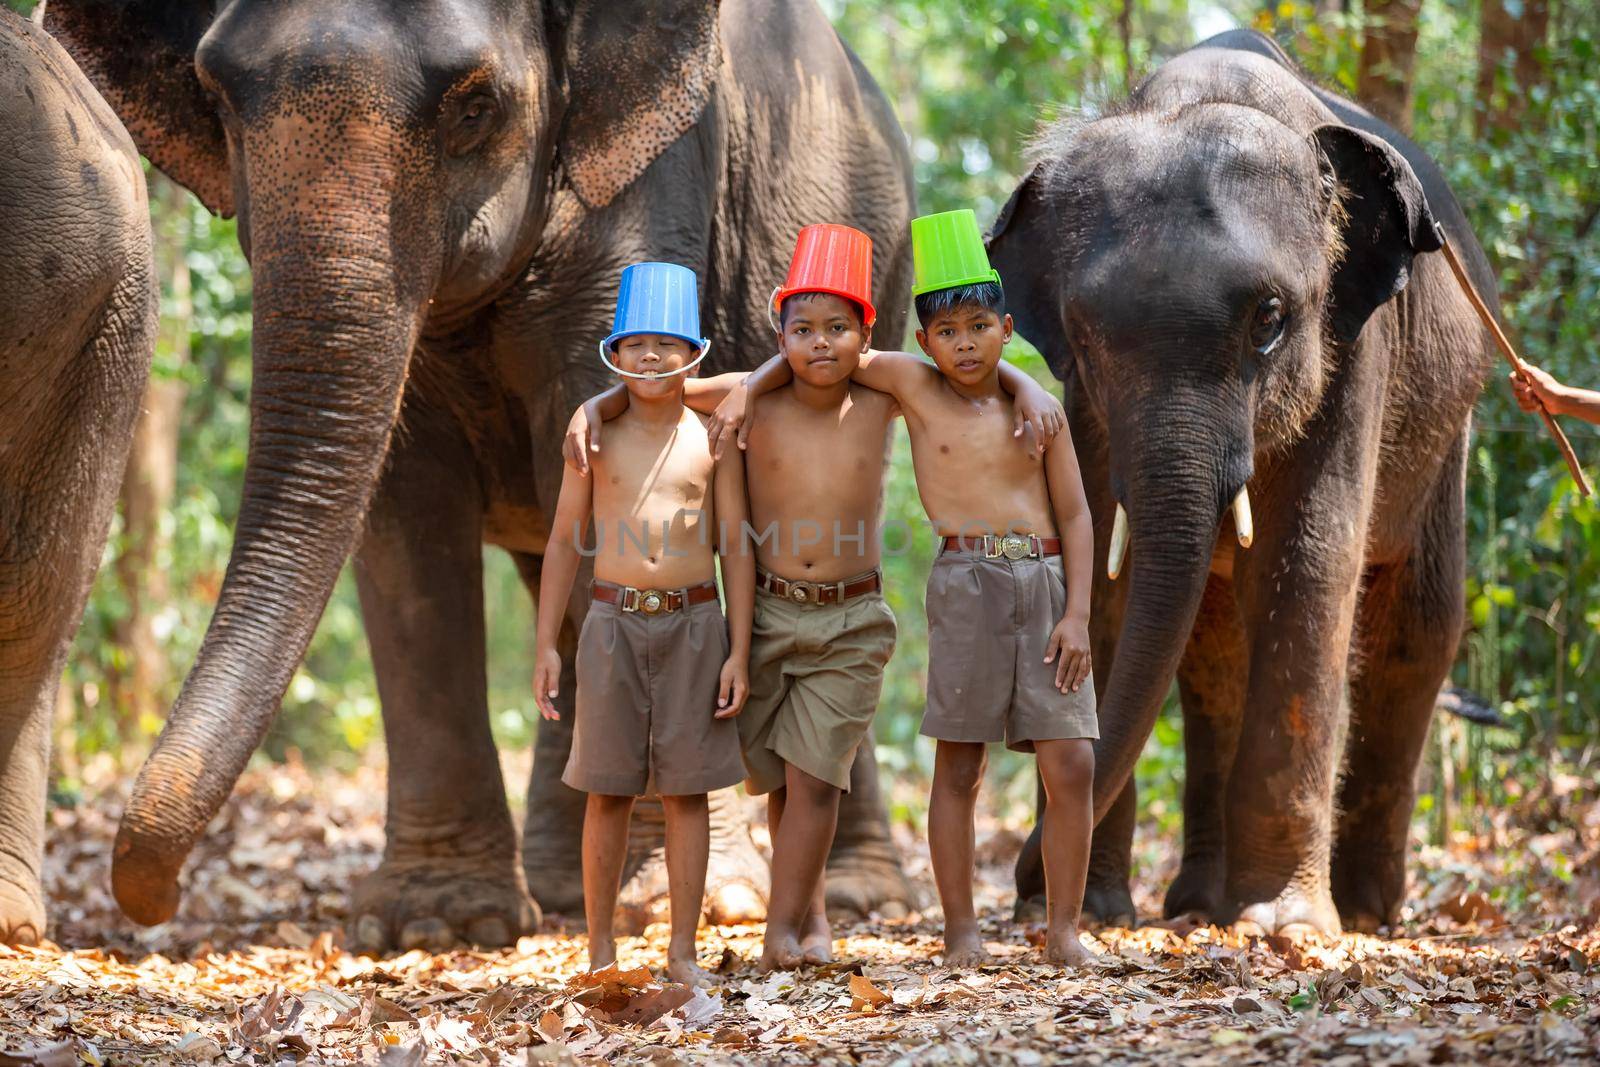 Children play watering in forest against elephants.